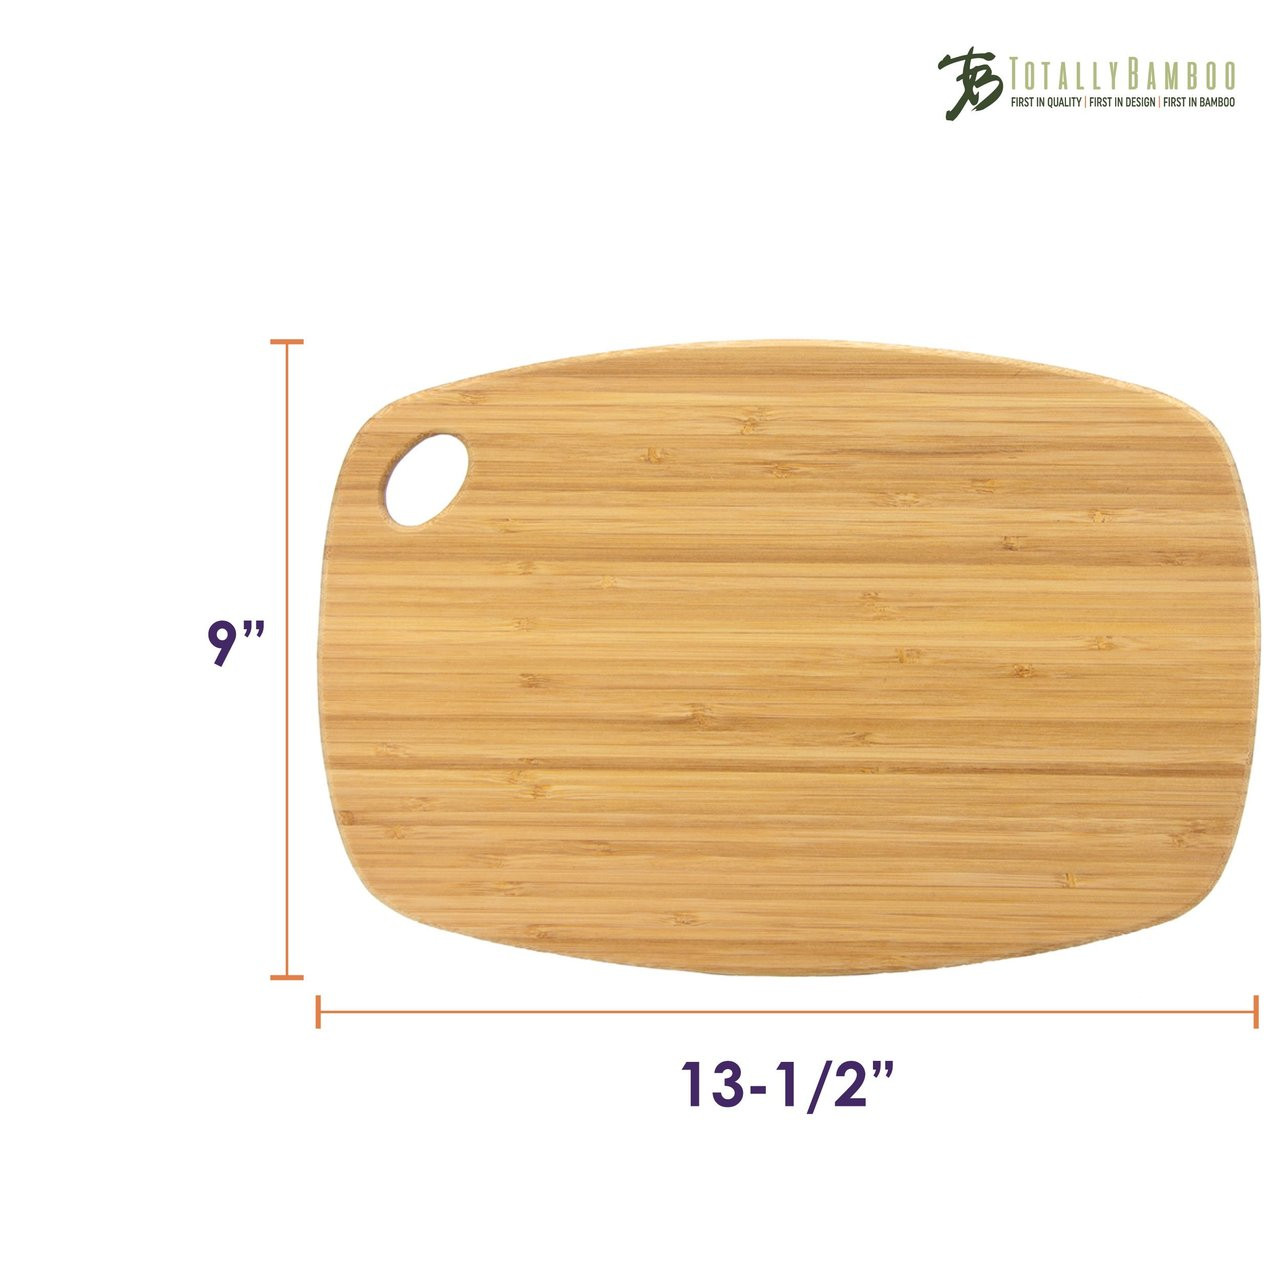 Haul Size) Cutting Board and Divider - Specifically Designed for